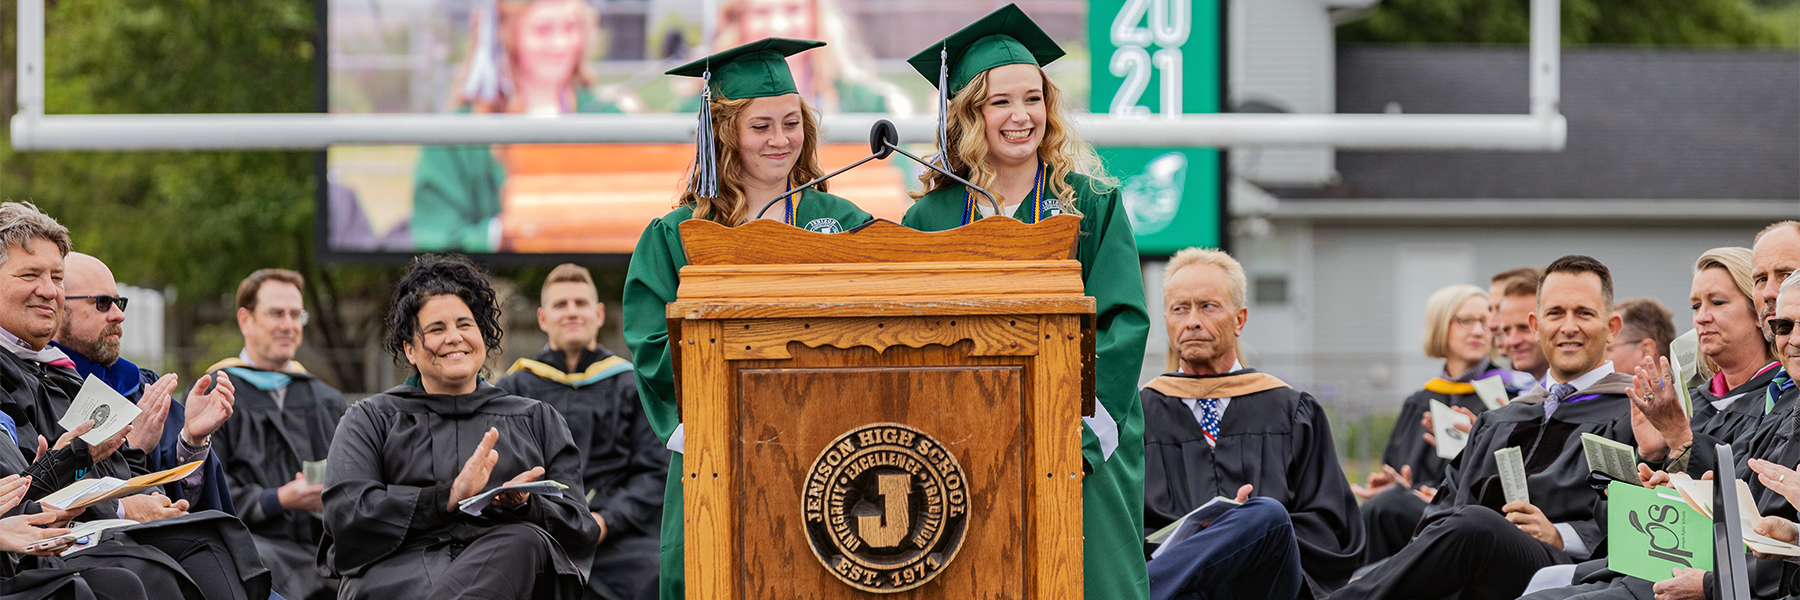 Two female students speaking at podium 